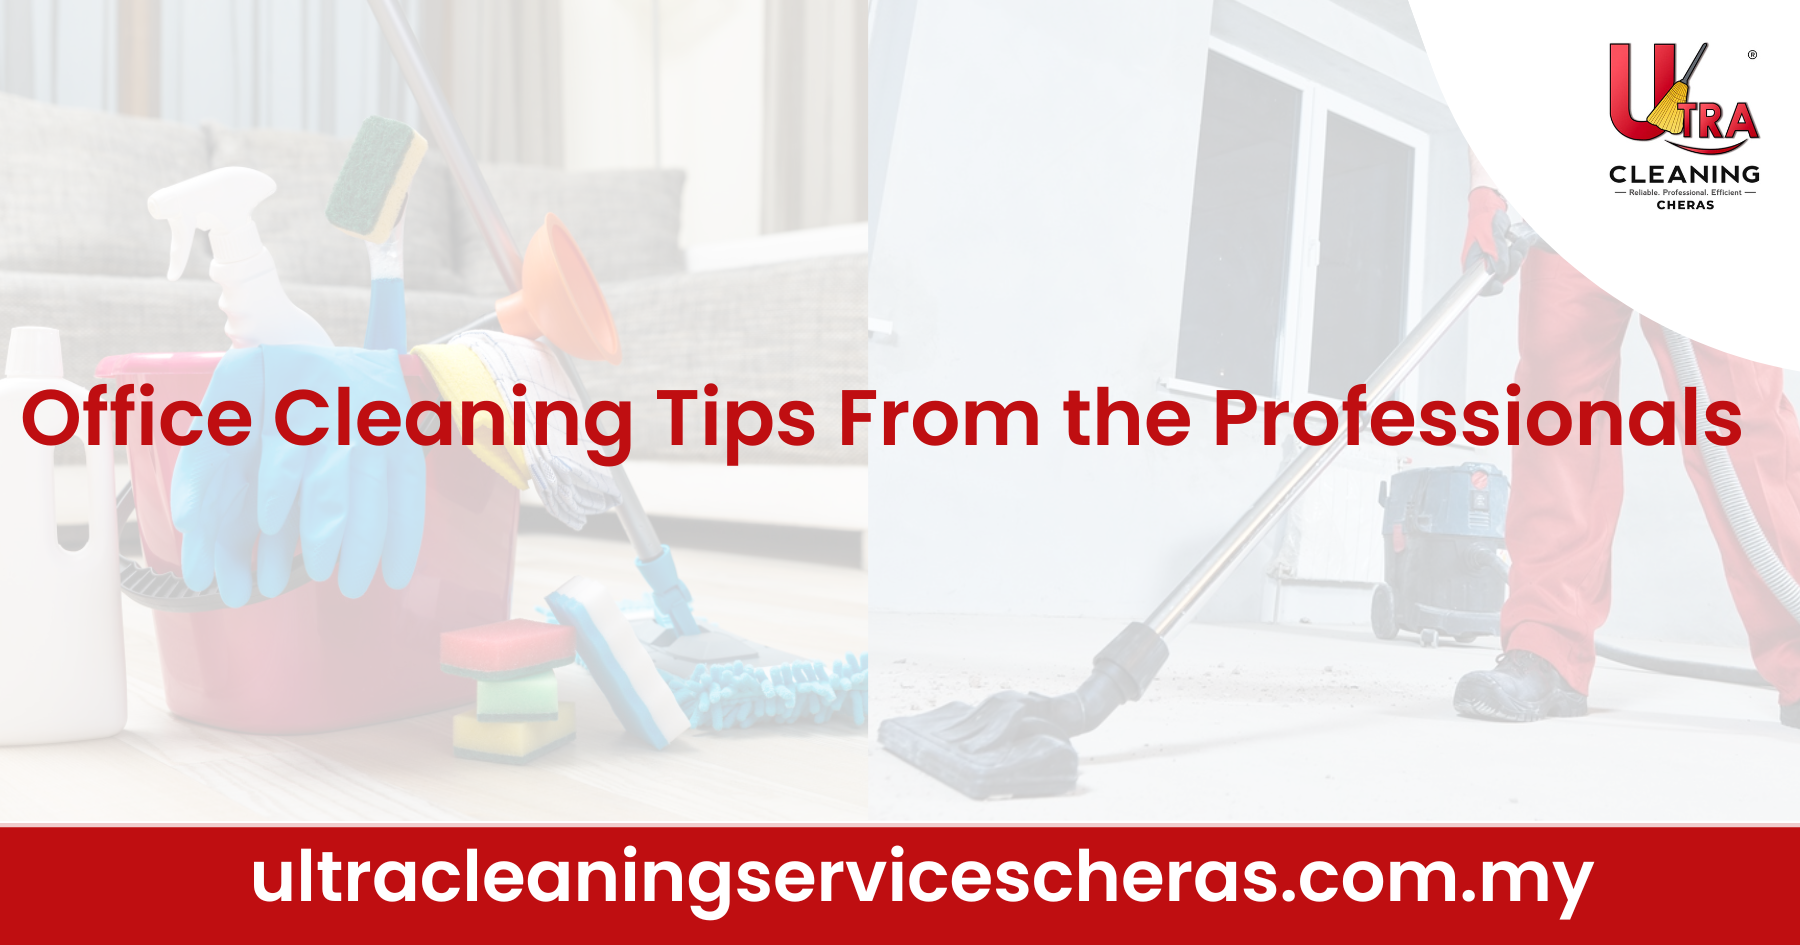 Office Cleaning Tips From the Professionals